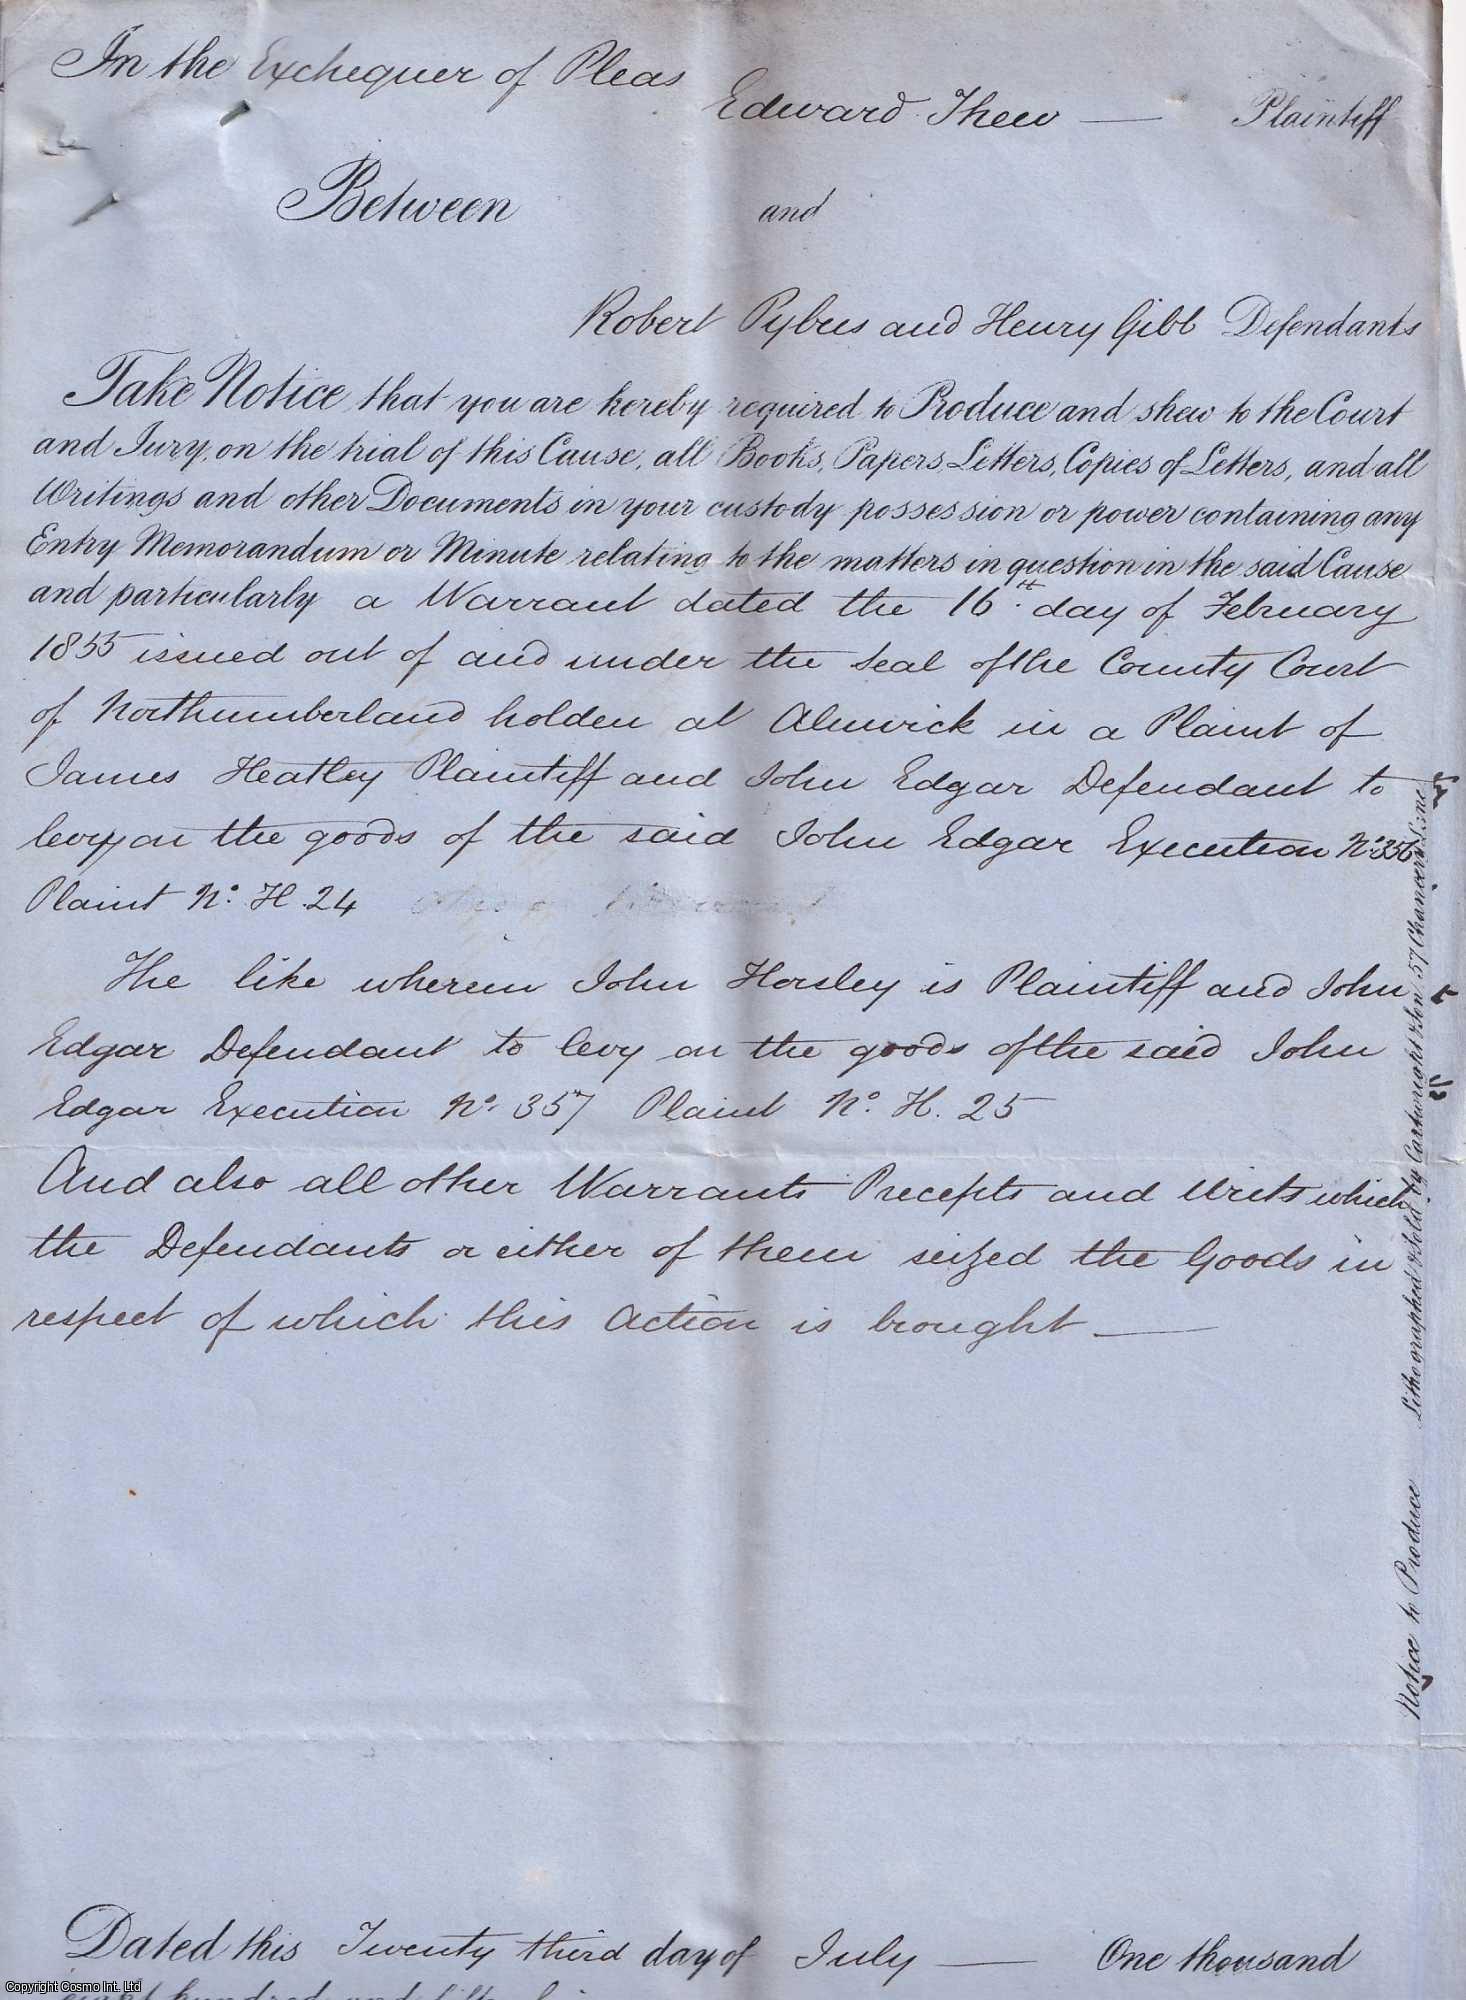 1855 Legal Notices Thew v Pybus and Gibb, Alnwick. - Notices to Produce and Adduce evidence in the case of Edward Thew vs Robert Pybus and Henry Gibb of Alnwick Northumberland. Five notices, part printed, but largely handwritten on blue paper (8 x 13 inches).